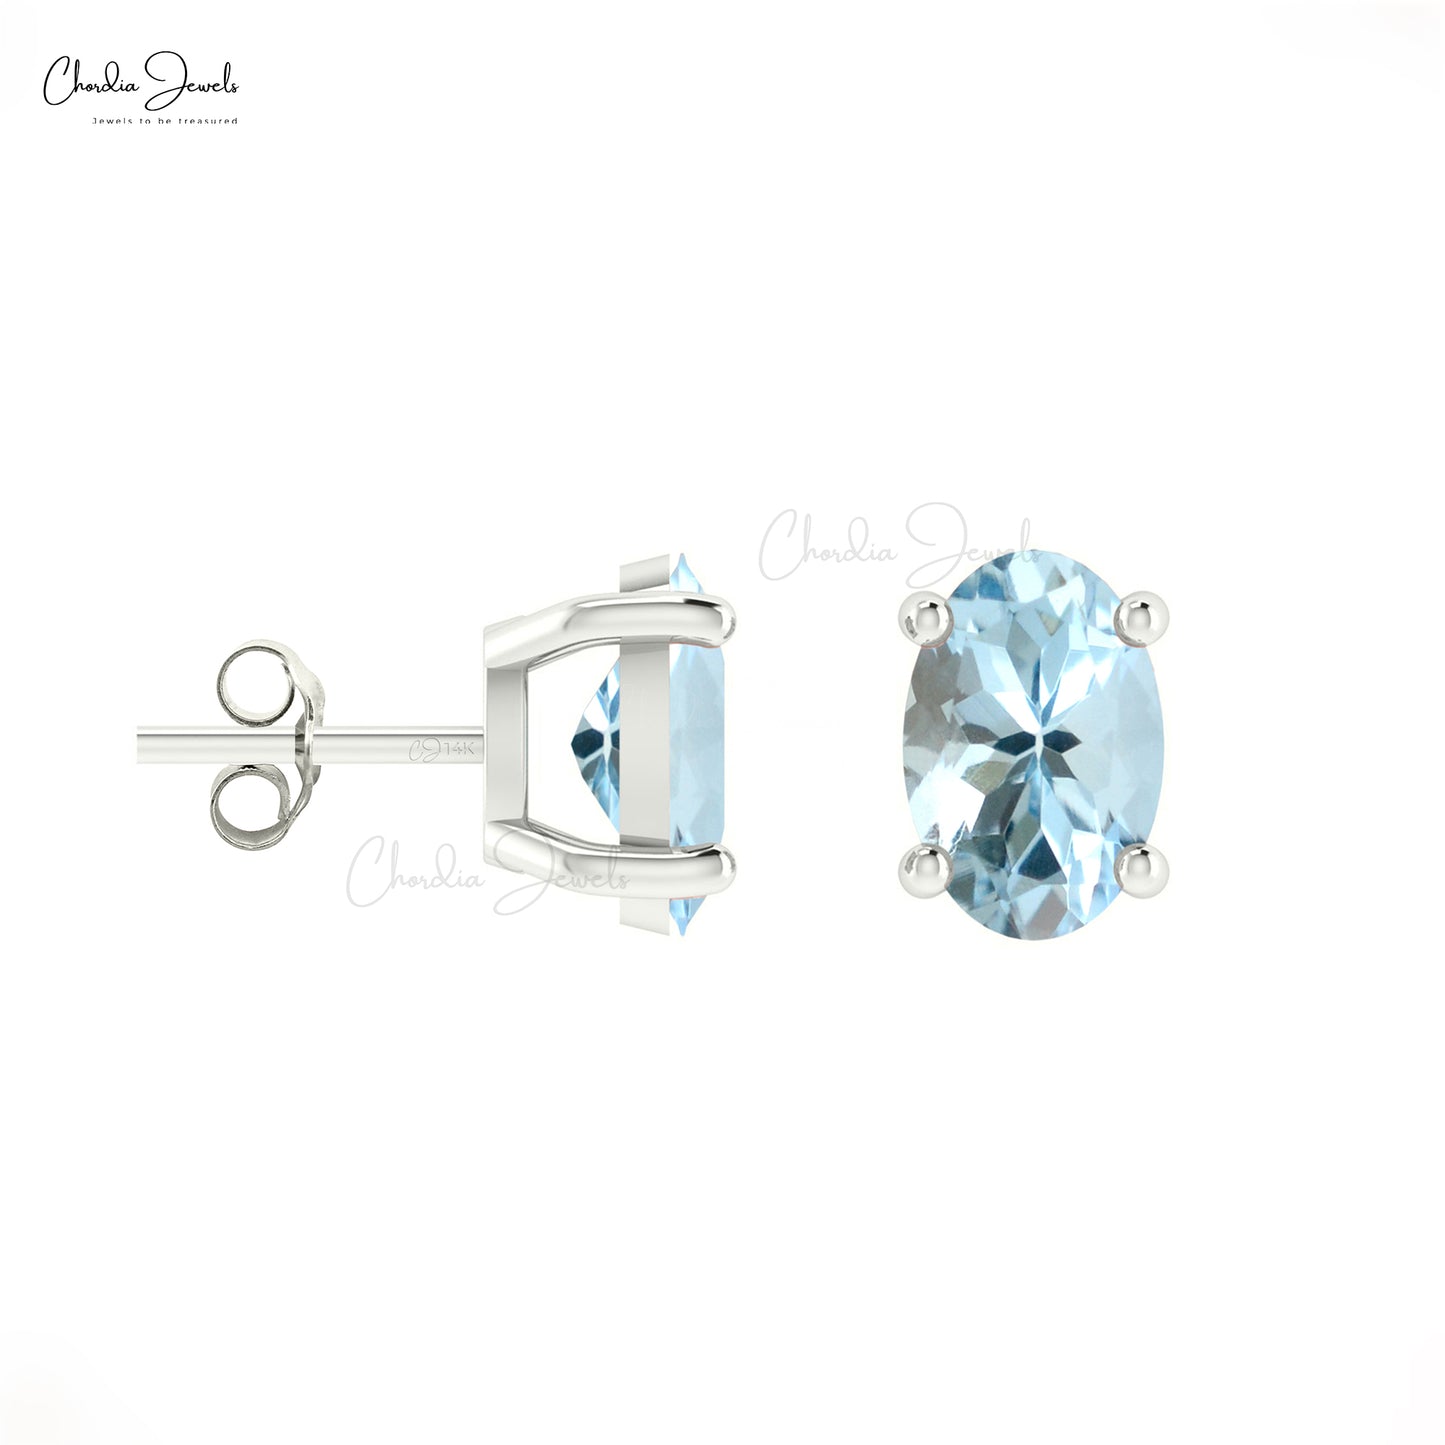 Authentic Aquamarine Solitaire Stud Earrings in 14k Solid Gold Minimalist Earrings